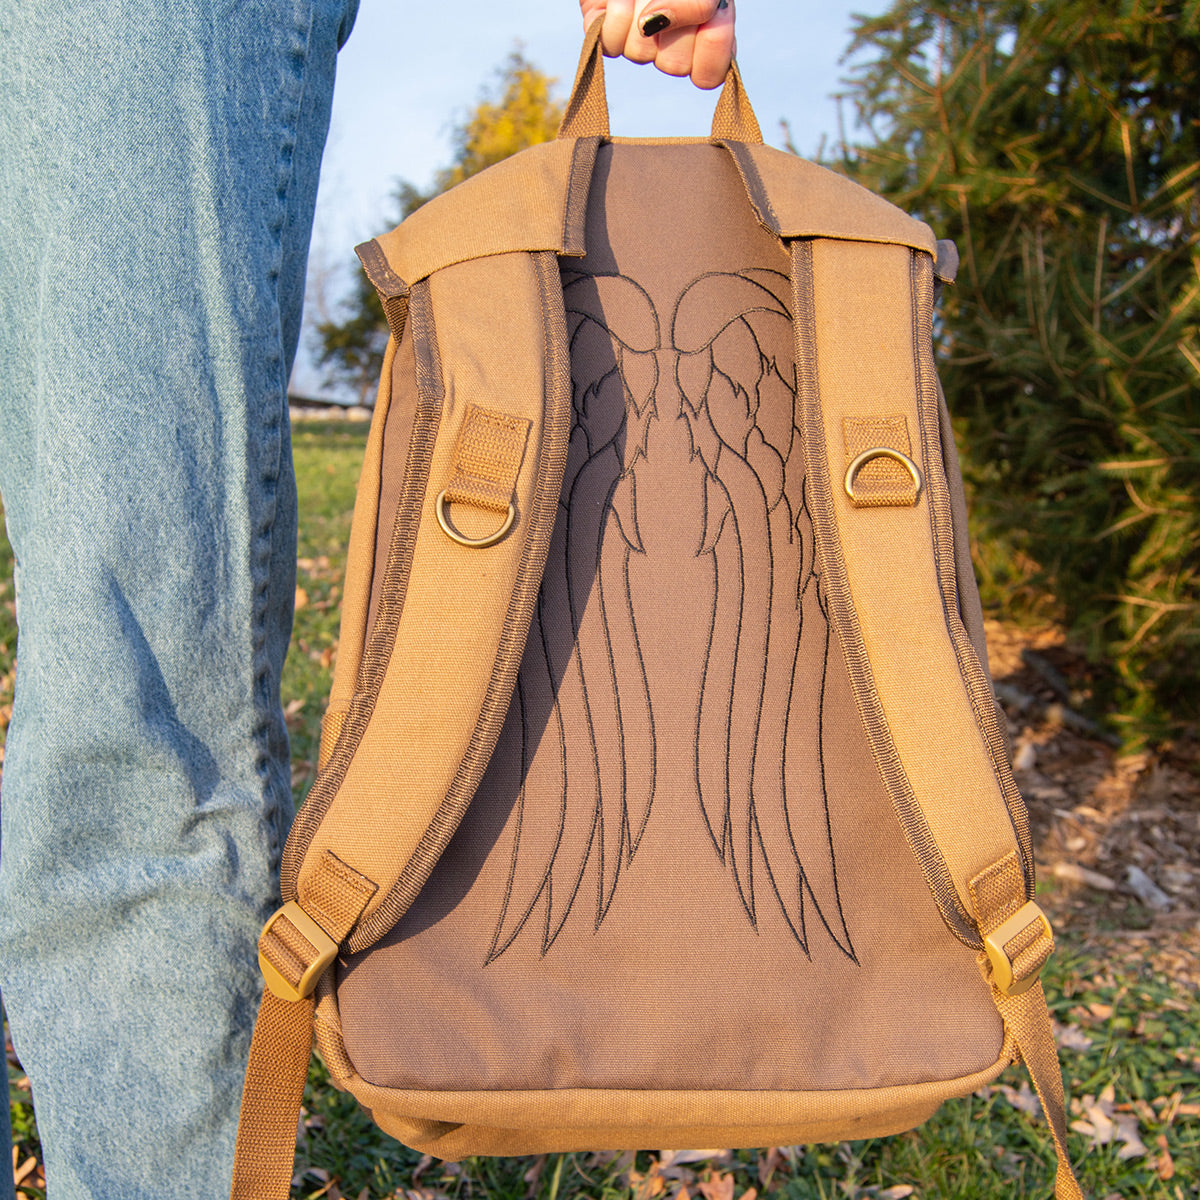 The Walking Dead Backpack - Inspired By Daryl Dixon